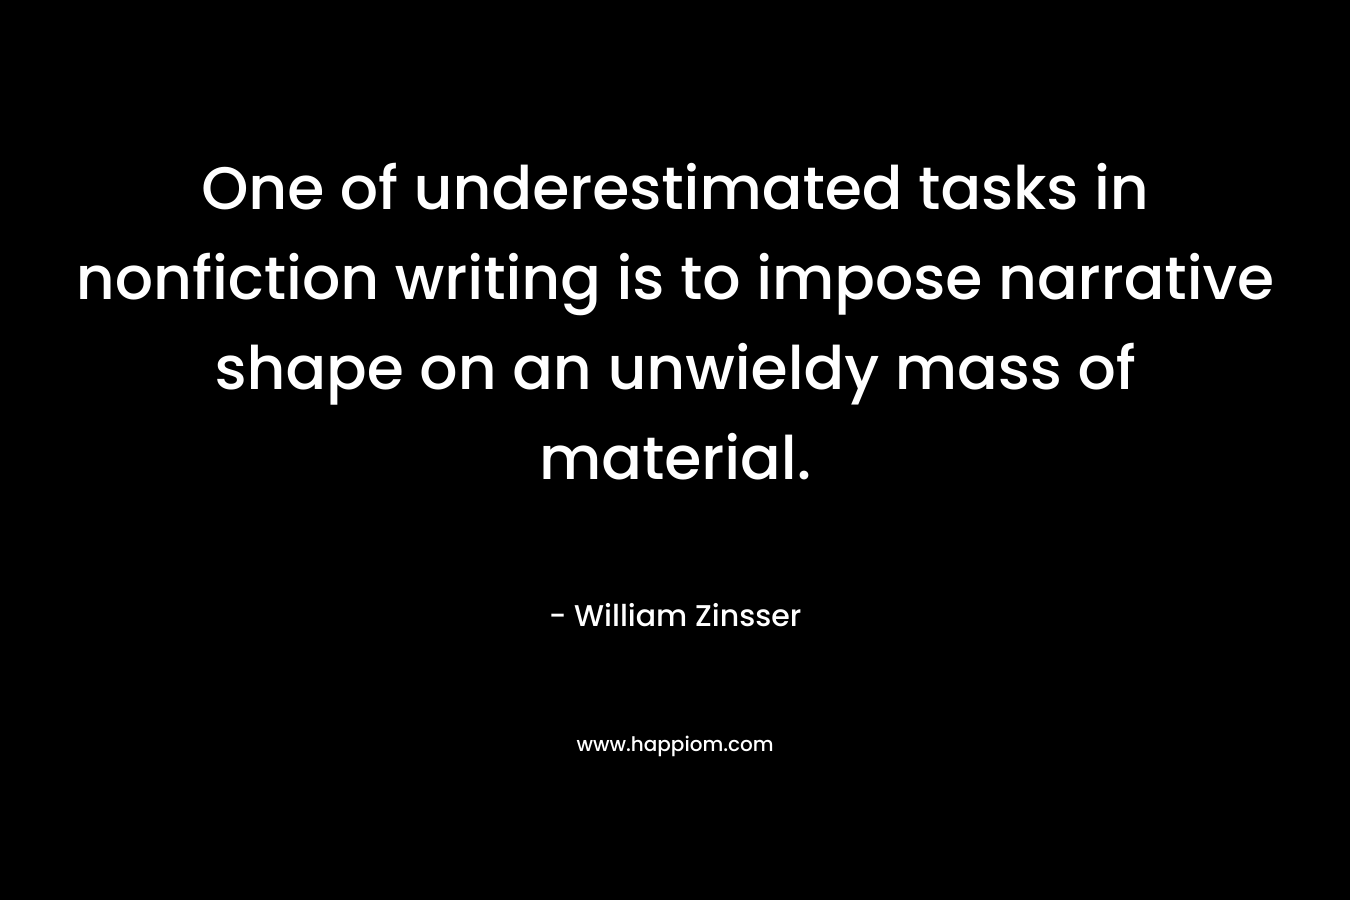 One of underestimated tasks in nonfiction writing is to impose narrative shape on an unwieldy mass of material.